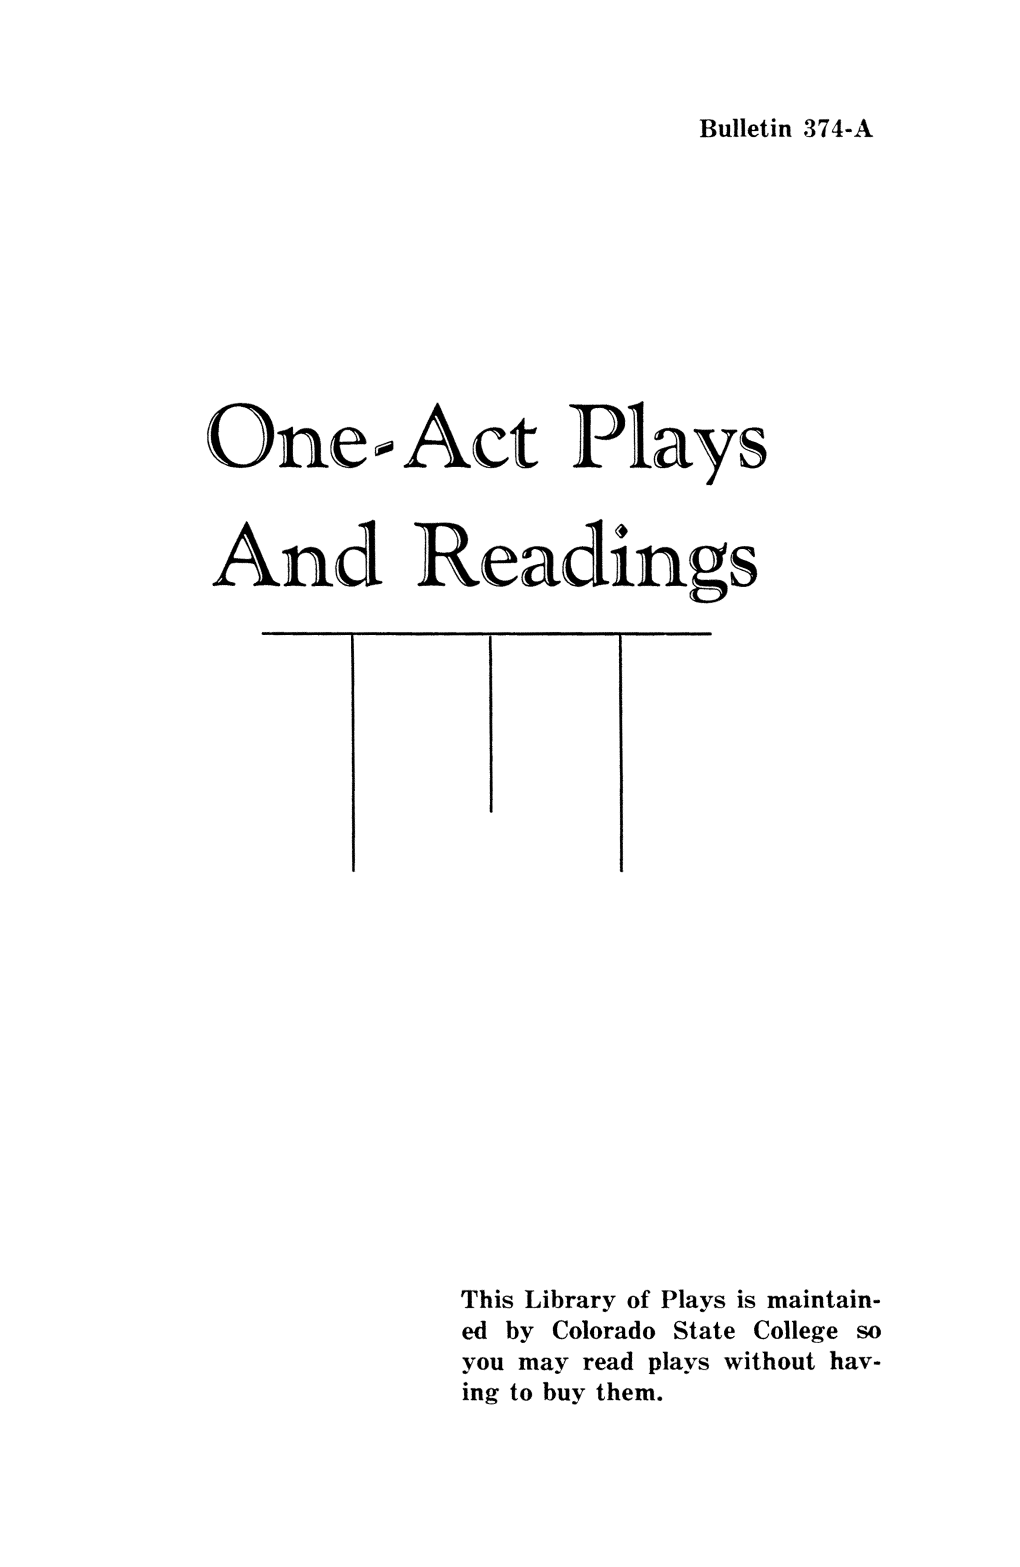 One-Act Plays and Readings